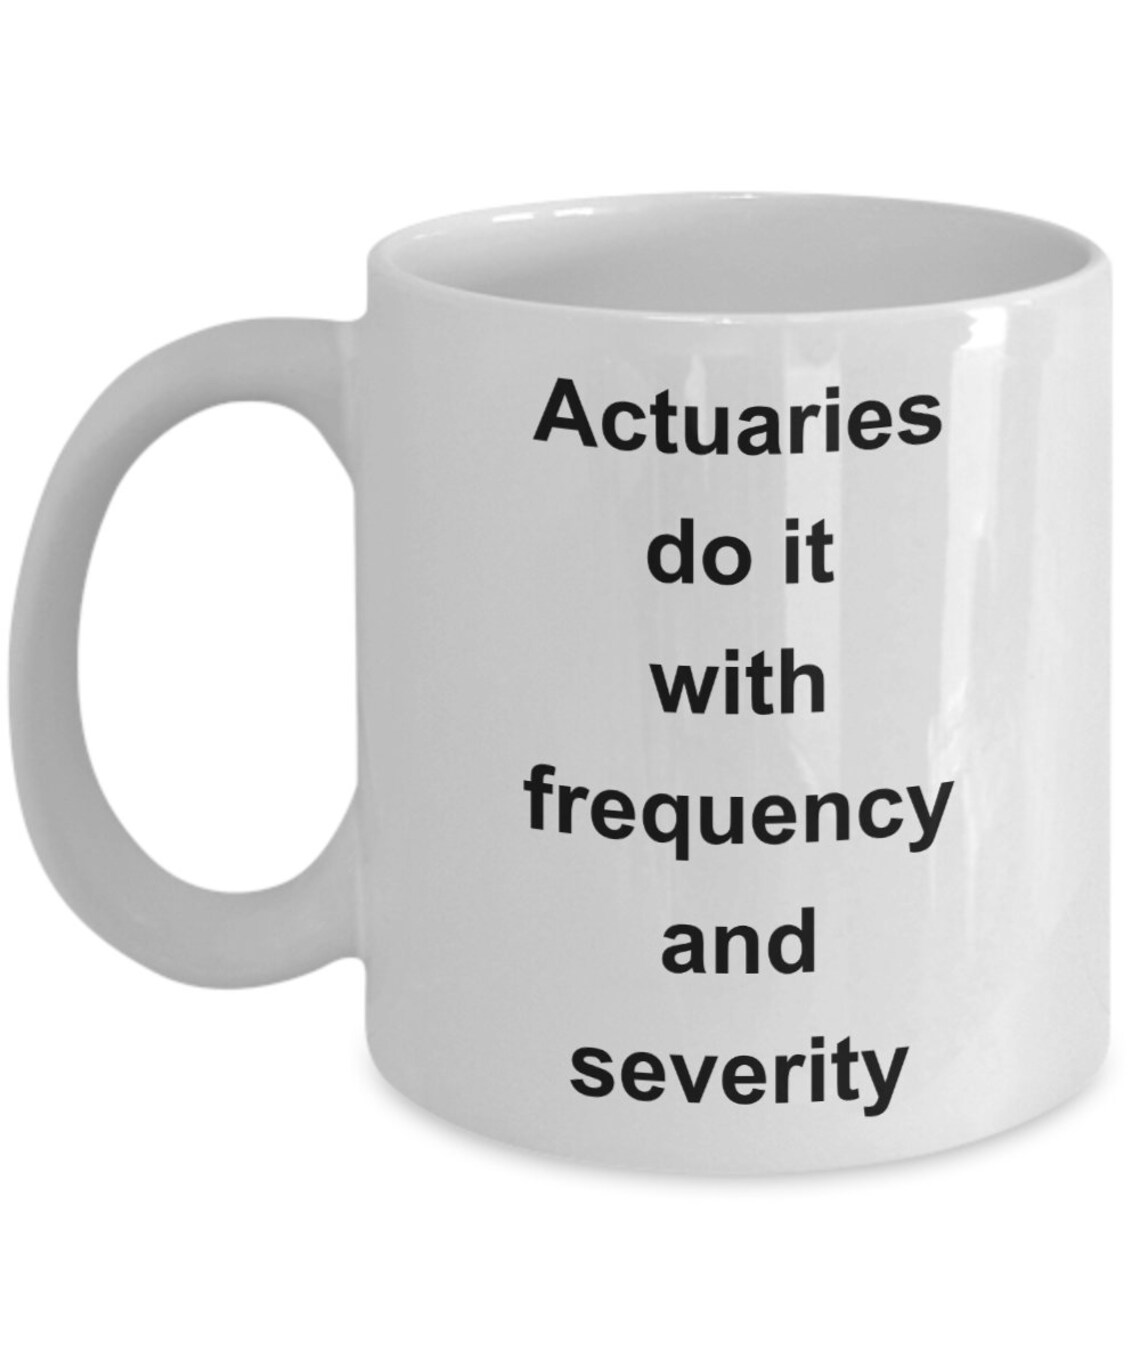 learning windows or mac for actuary